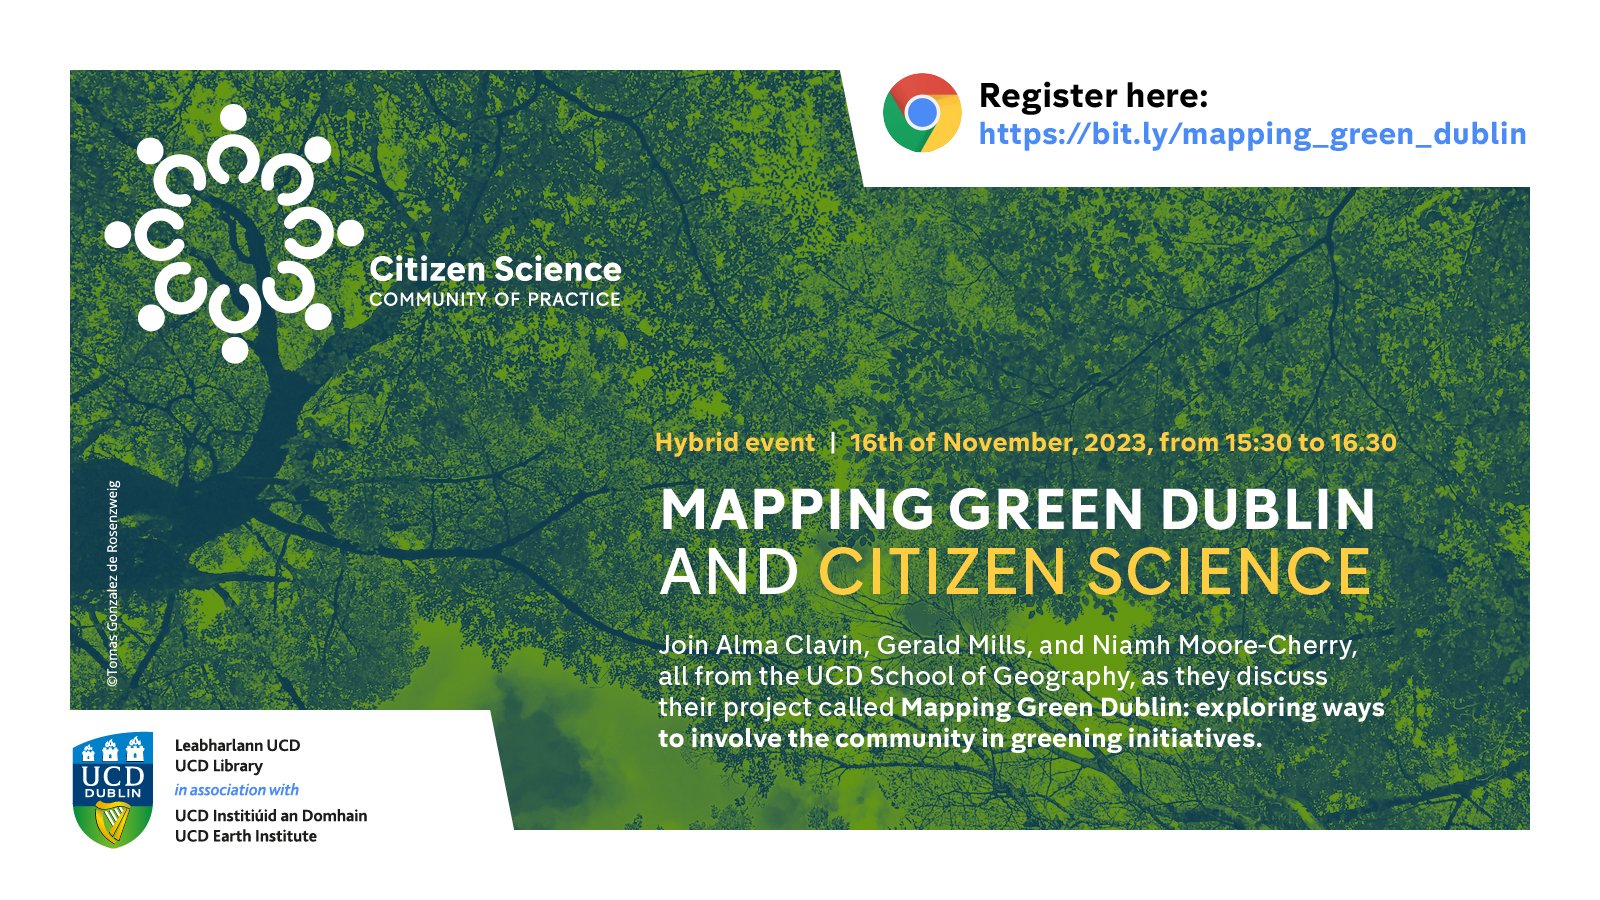 Mapping Green Dublin event poster